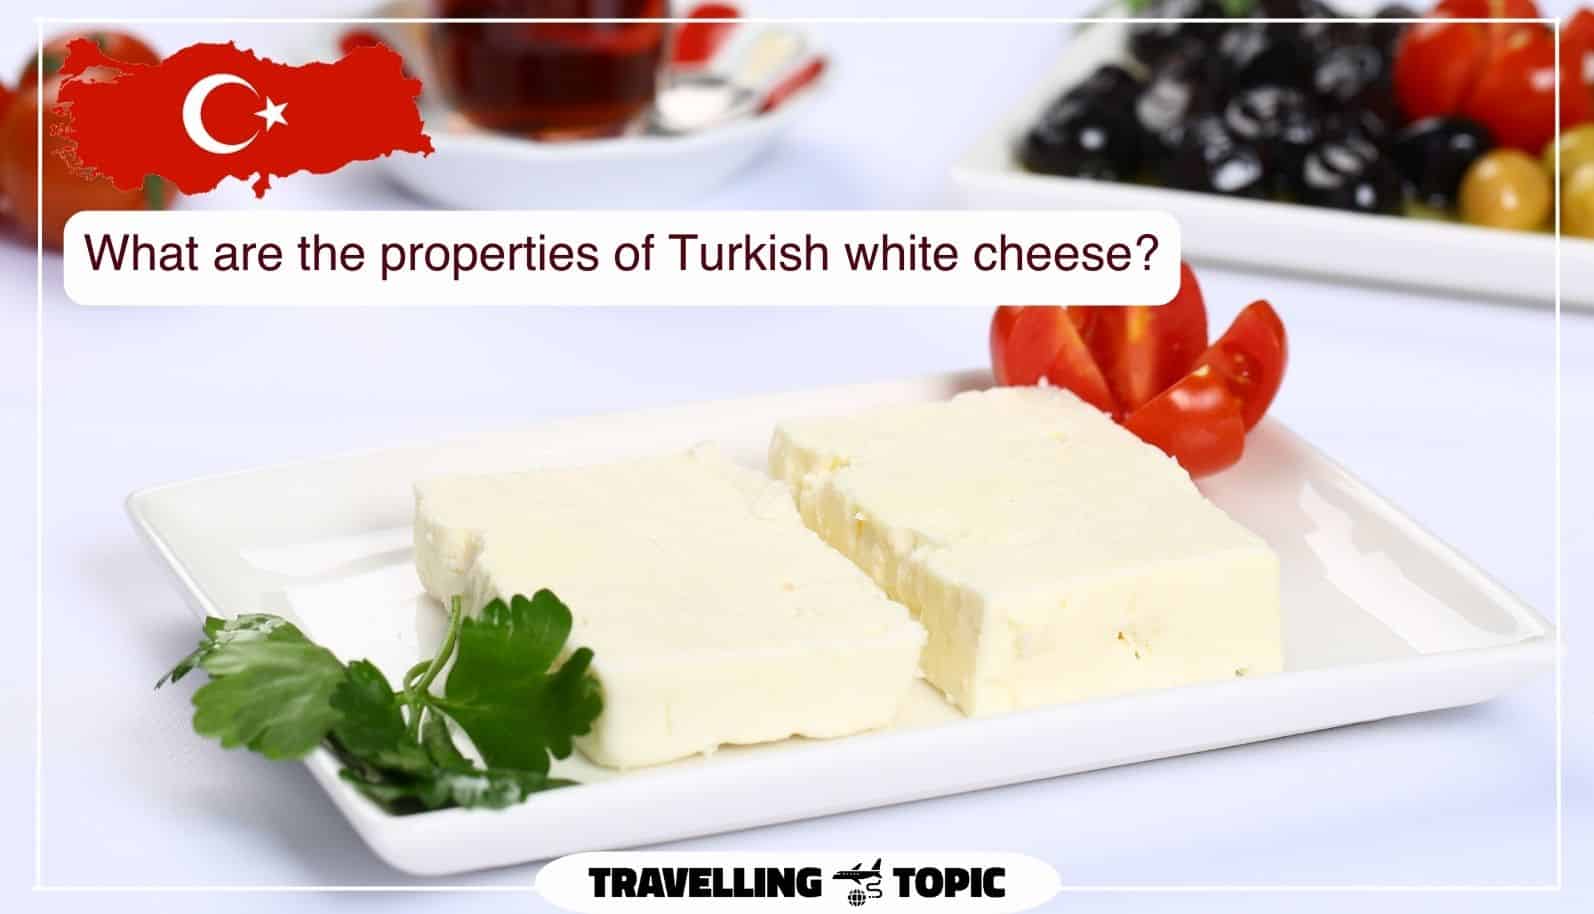 What are the properties of Turkish white cheese